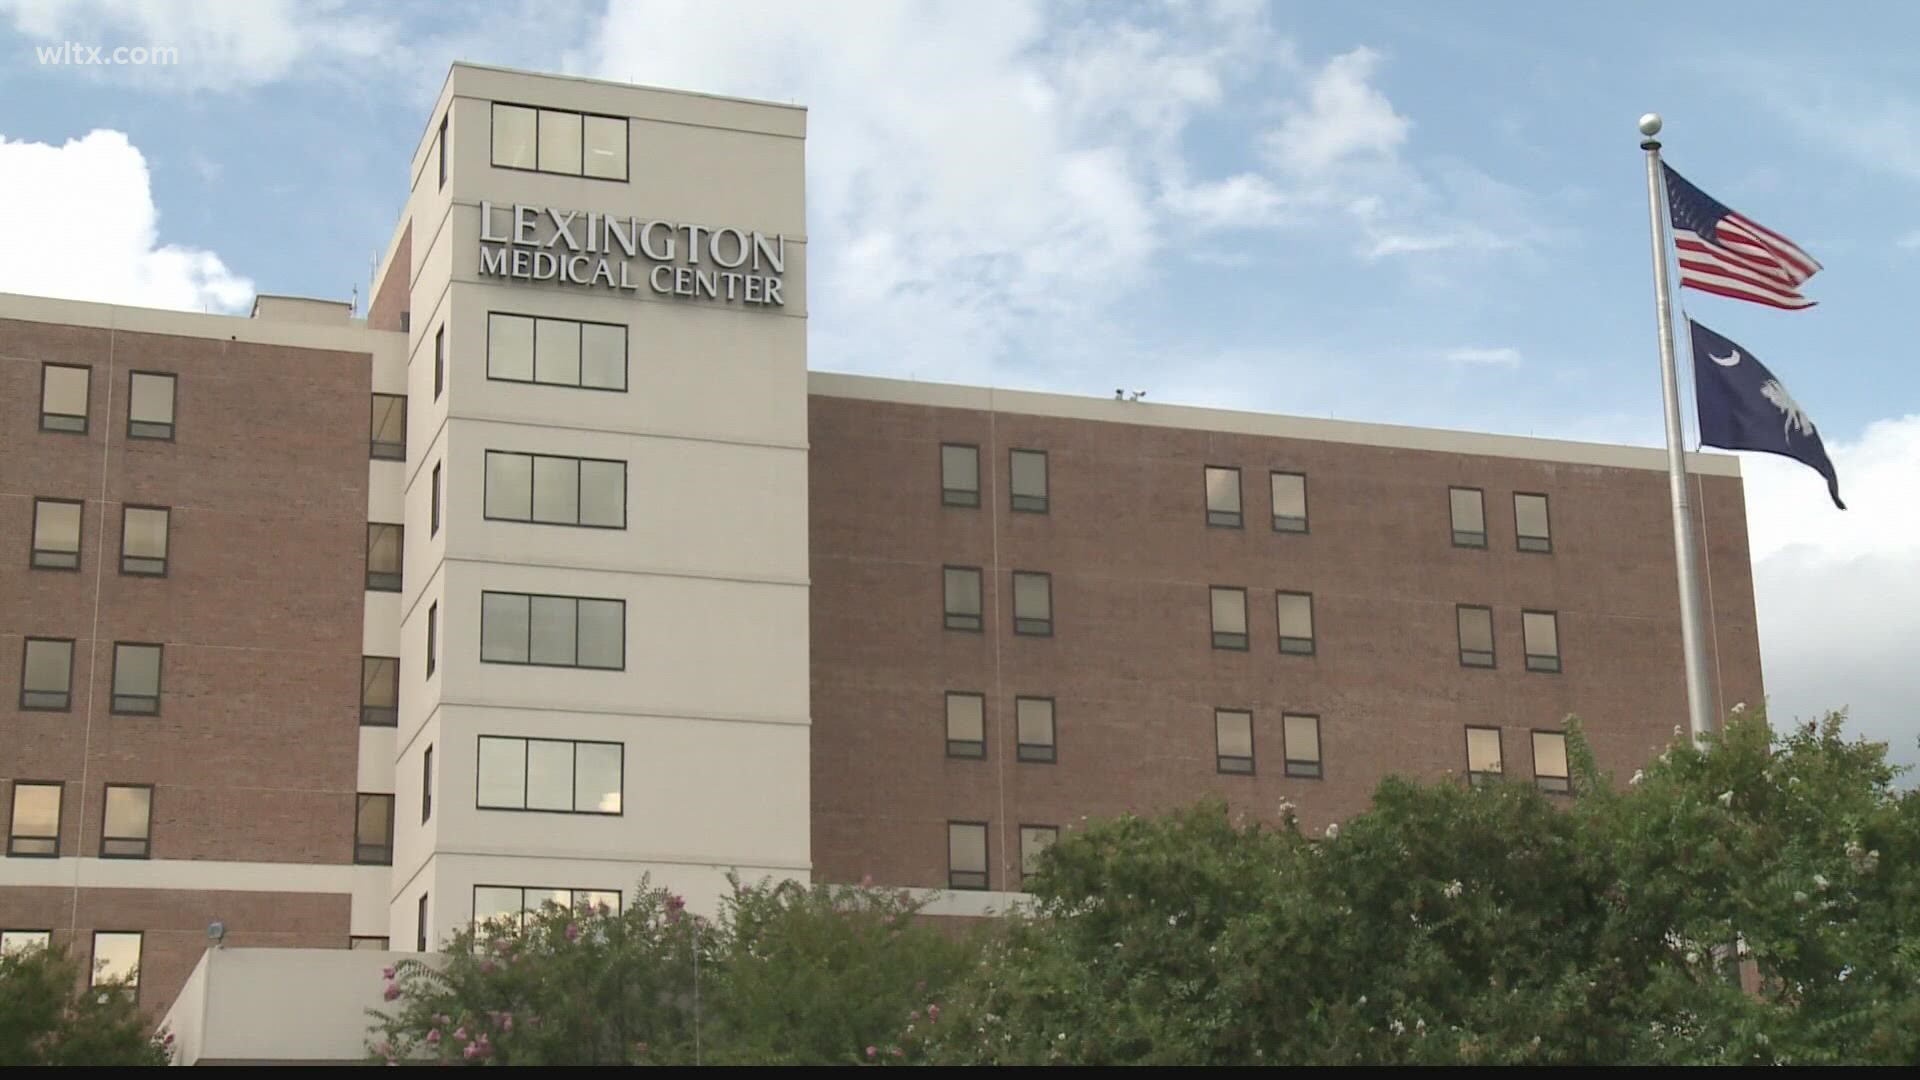 Some of the nurses from the Irmo surgery center have been reassigned to care for patients in the hospital's intensive care unit.